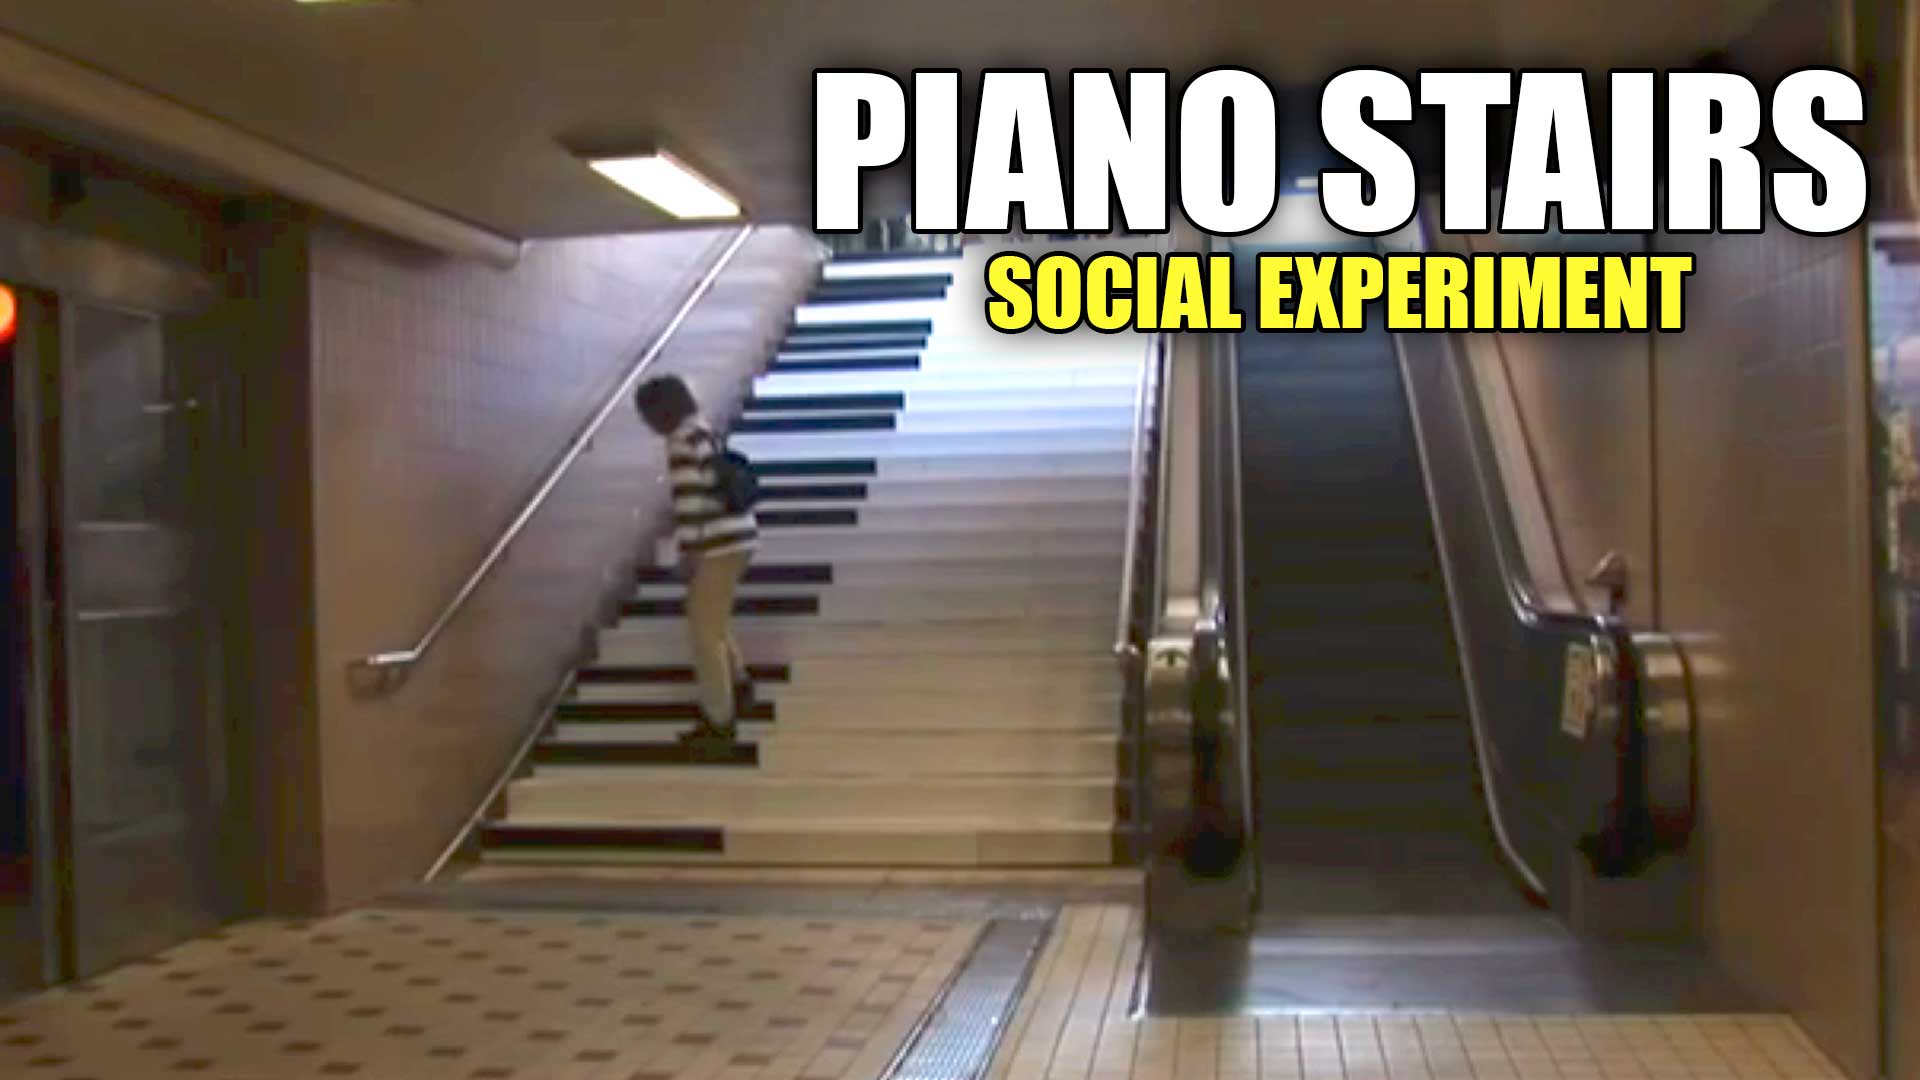 Piano Stairs: A Social Experiment To Help Increase Exercise